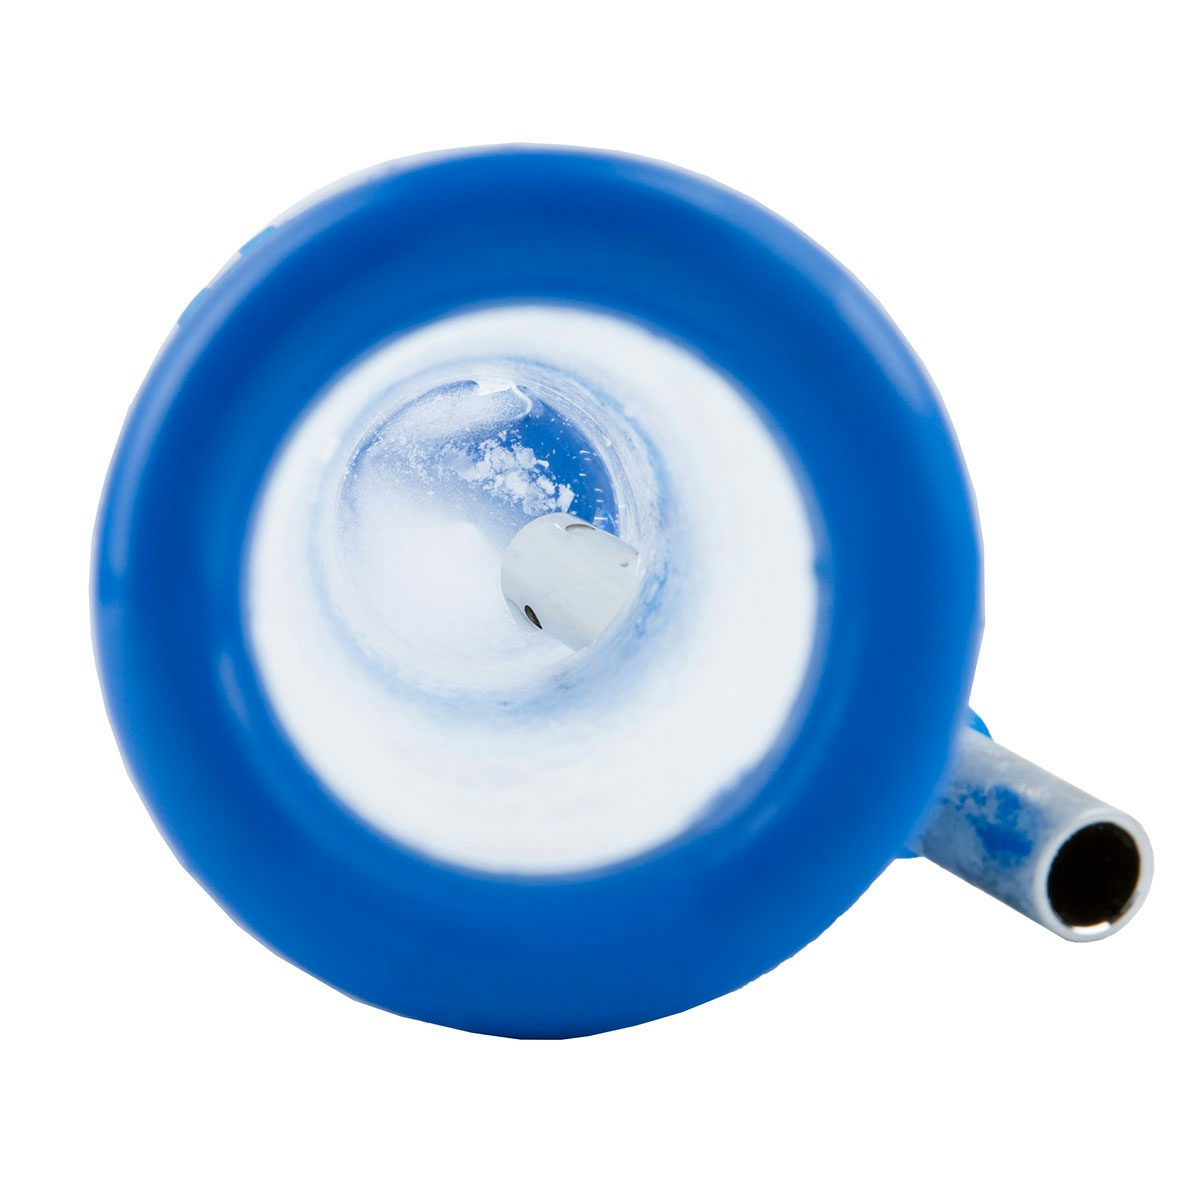 eyce water pipe mouth piece Celebrate Spring With an Ice Bong